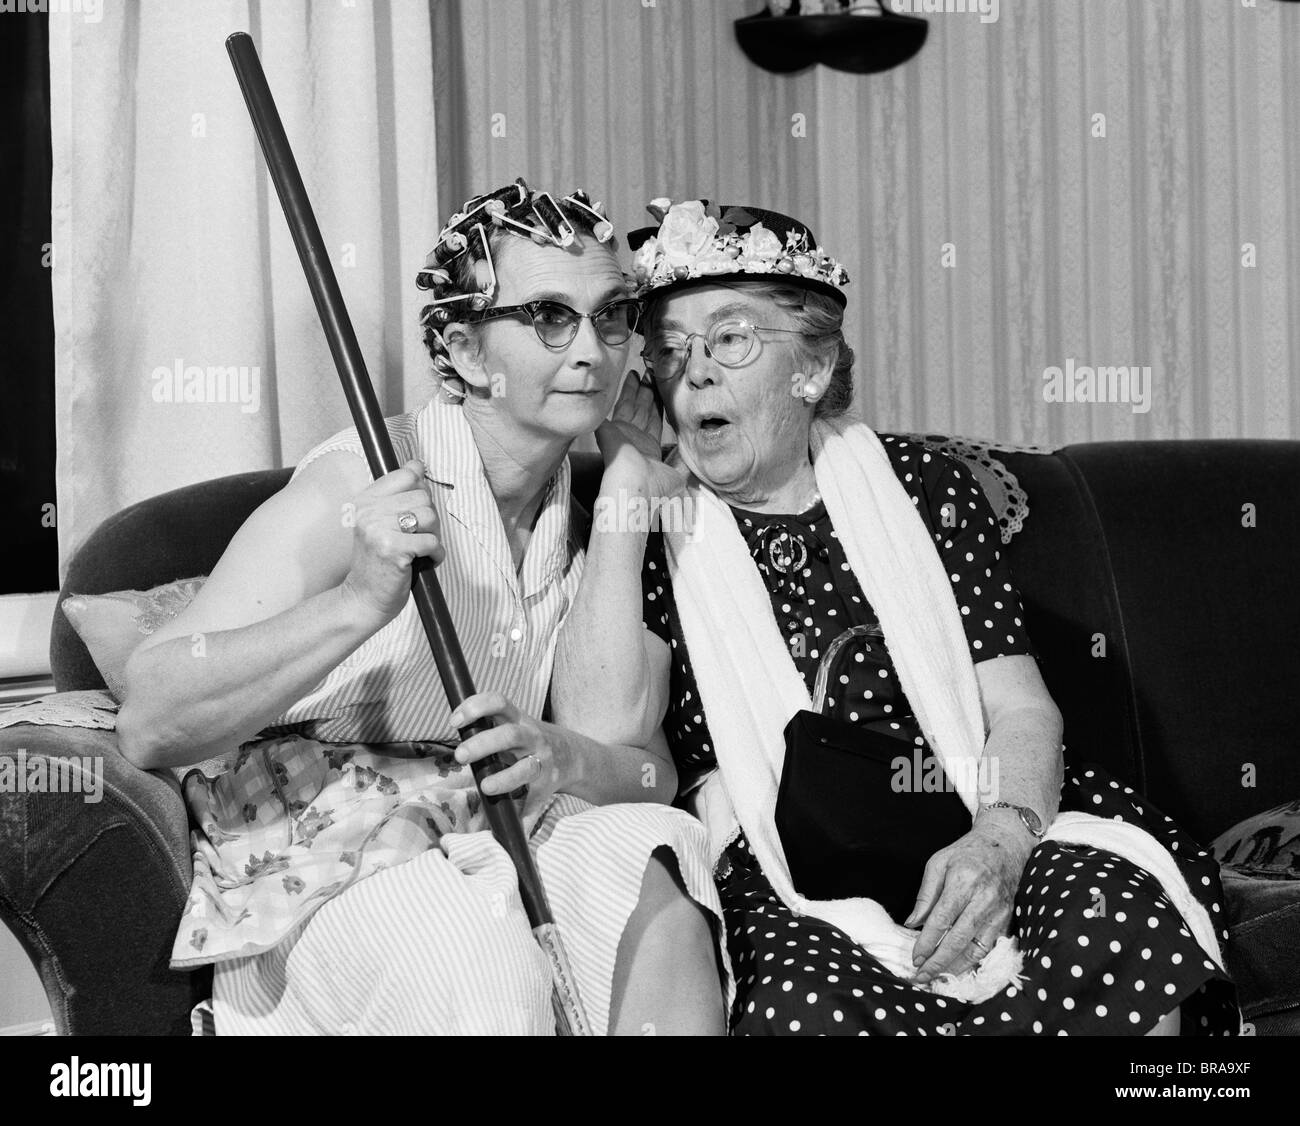 1950s 1960s Two Elderly Women Characters Gossiping One Woman With Hair Curlers Other With Hat Stock Photo Alamy